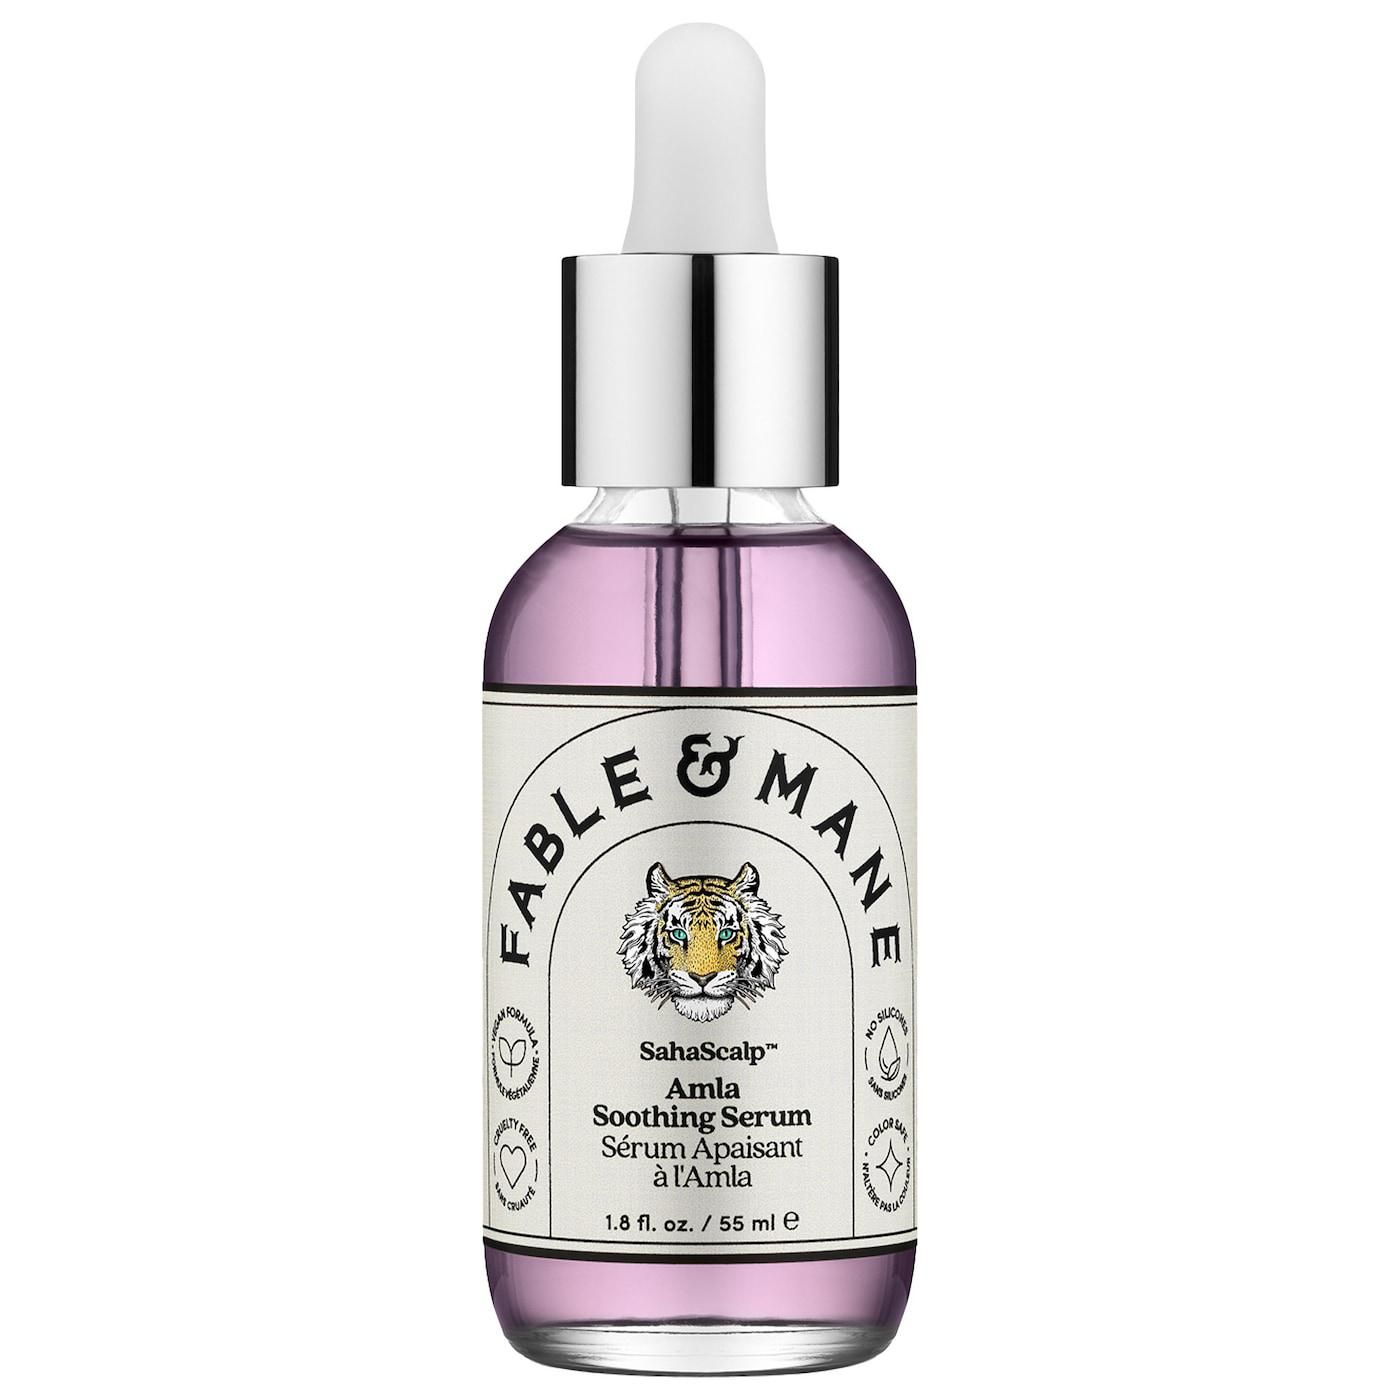 Fable and Mane Soothing Serum